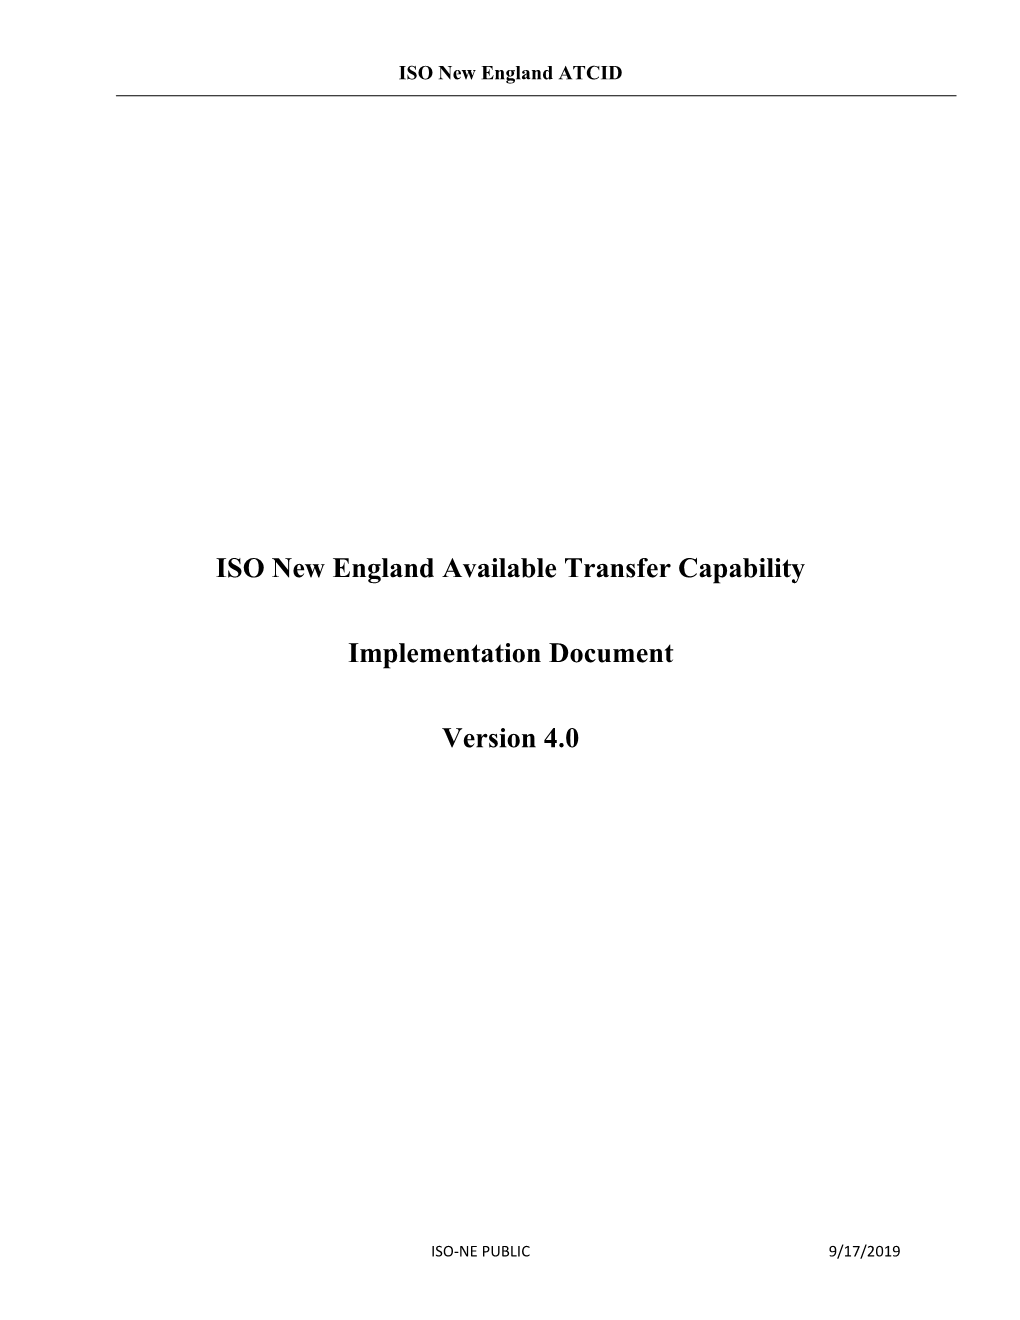 ISO New England Available Transfer Capability Implementation Document